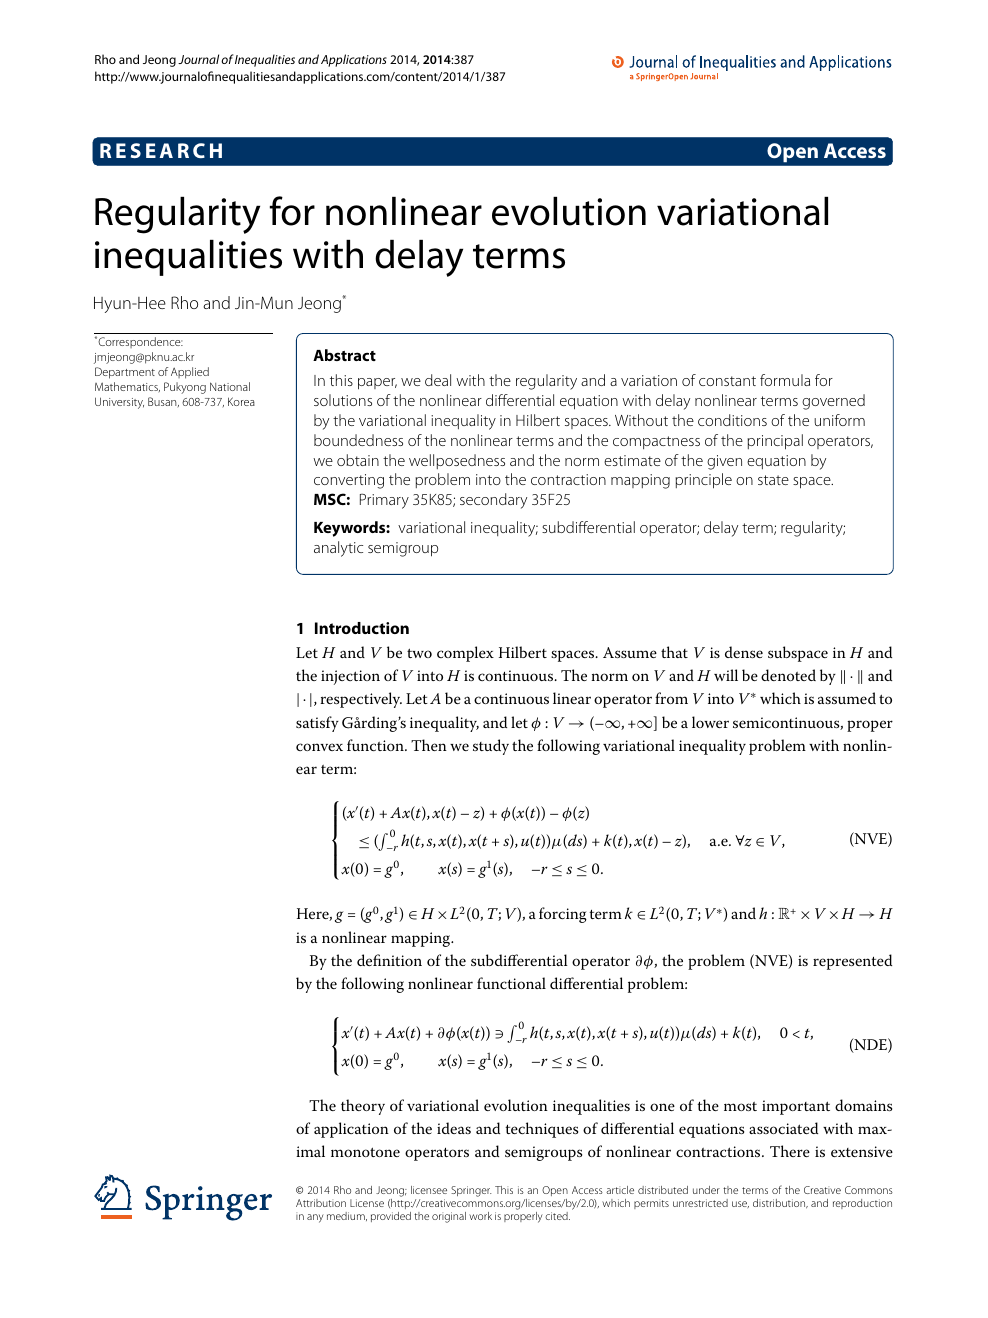 Regularity For Nonlinear Evolution Variational Inequalities With Delay Terms Topic Of Research Paper In Mathematics Download Scholarly Article Pdf And Read For Free On Cyberleninka Open Science Hub